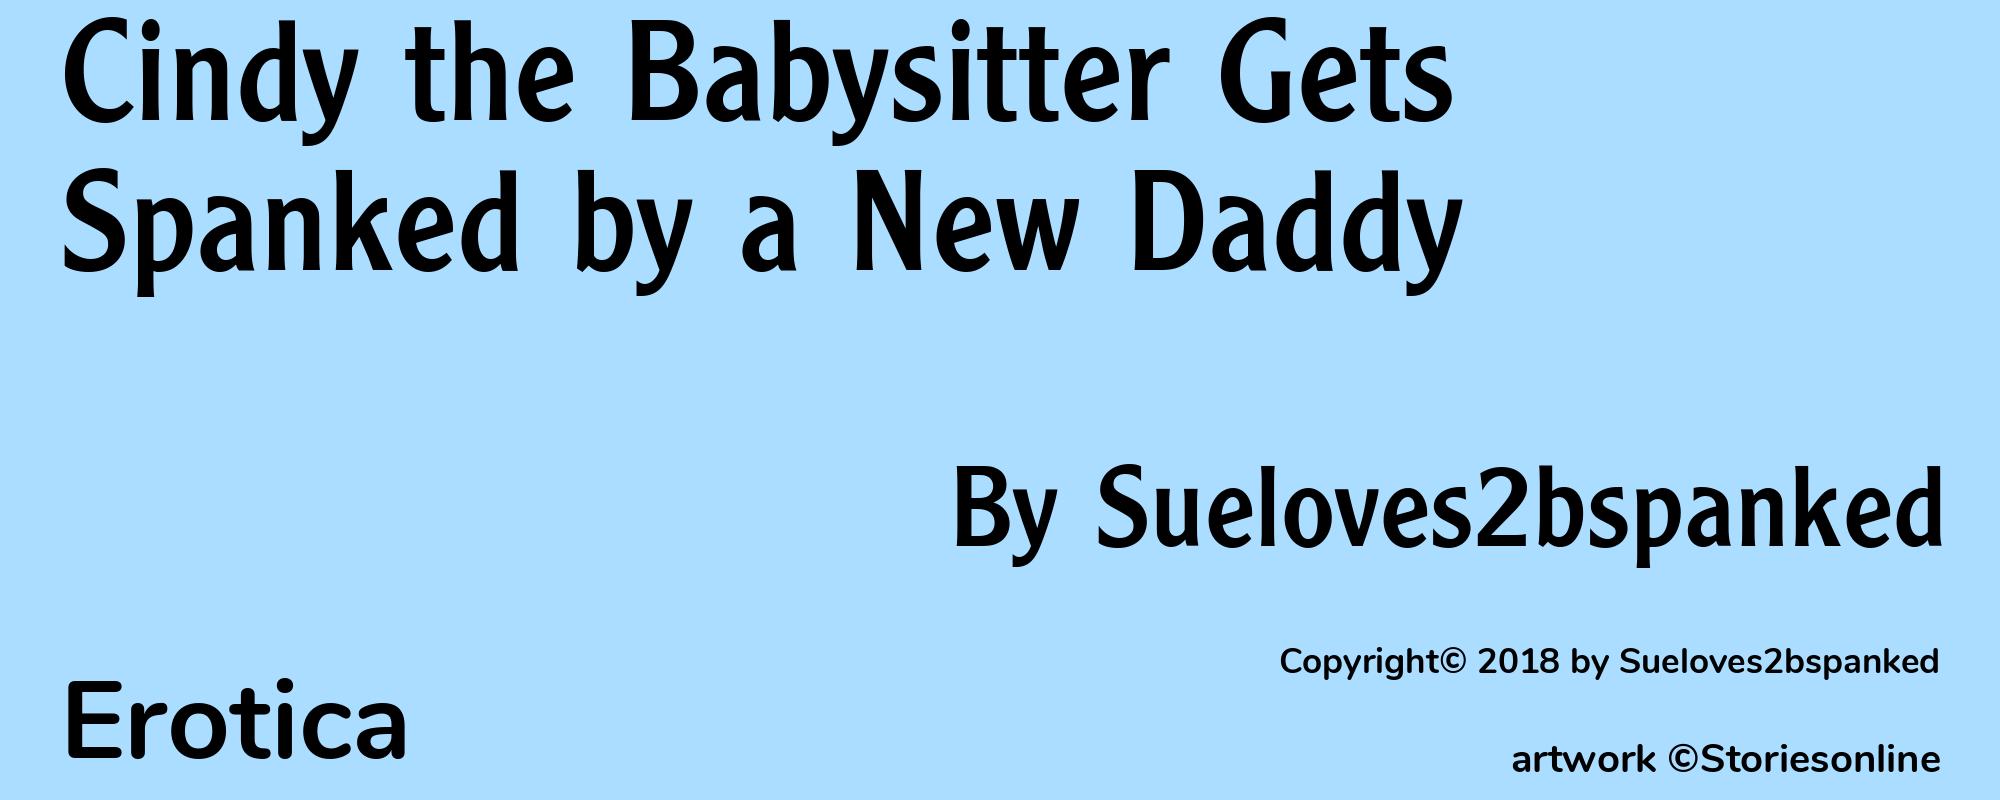 Cindy the Babysitter Gets Spanked by a New Daddy - Cover